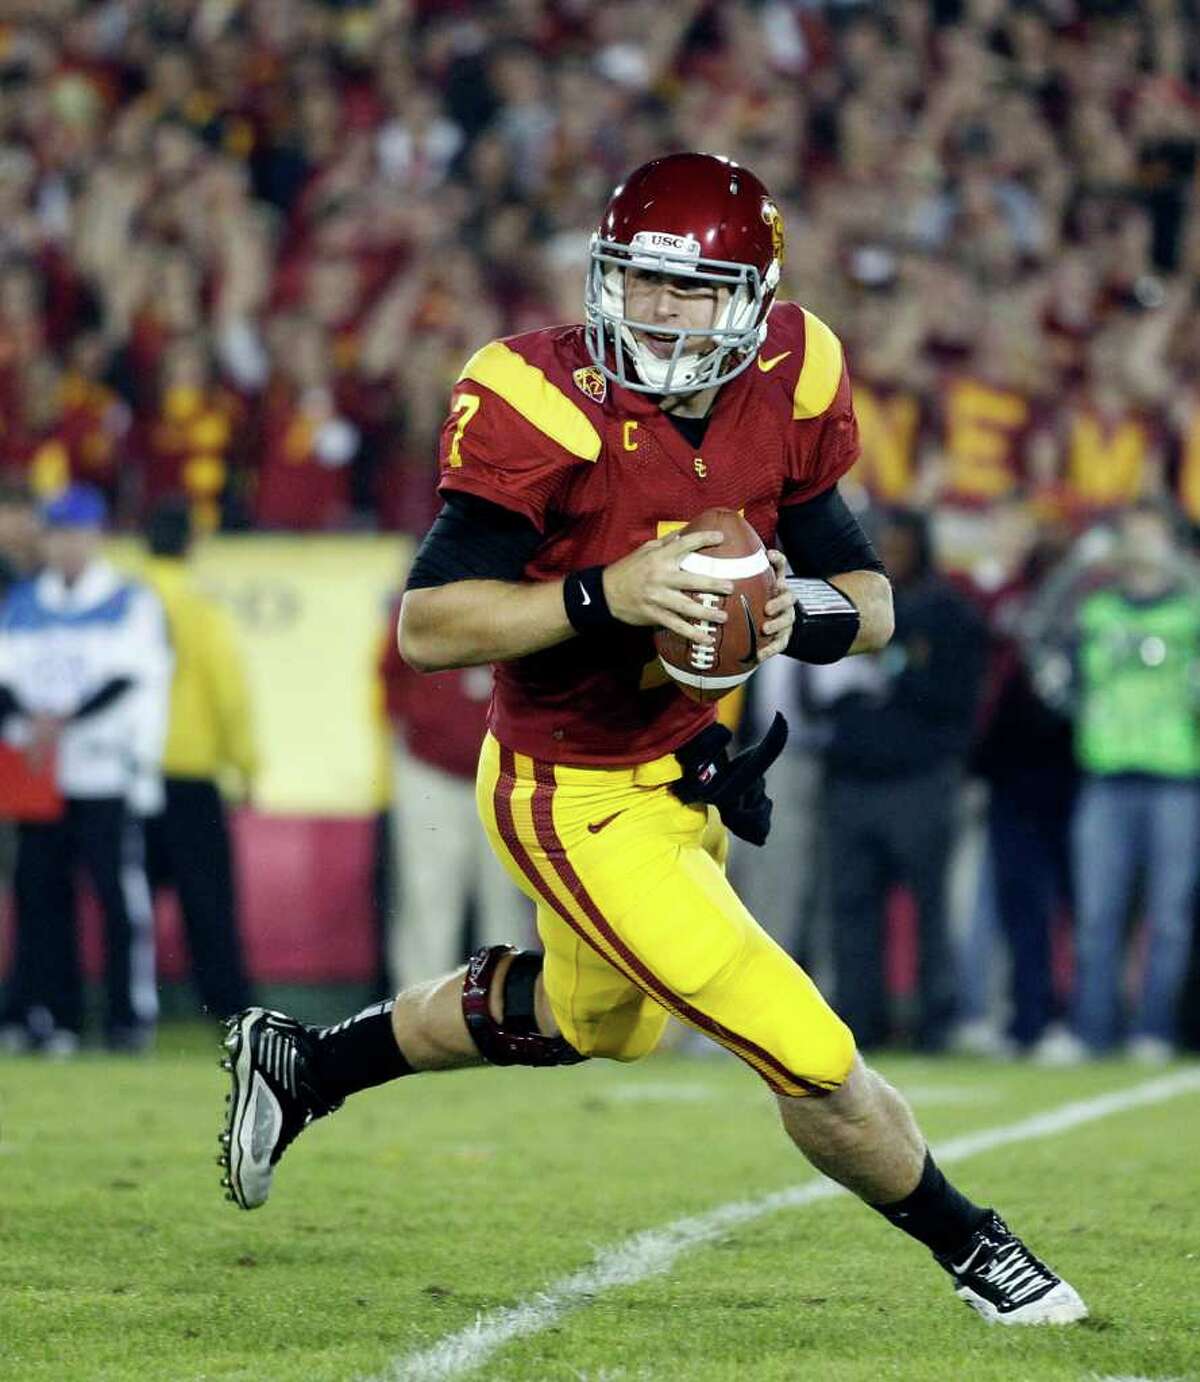 Heisman candidate quarterback Matt Barkley, who opted to return for his senior season, will make Southern Cal a legitimate threat to reach the BCS title game in 2013.